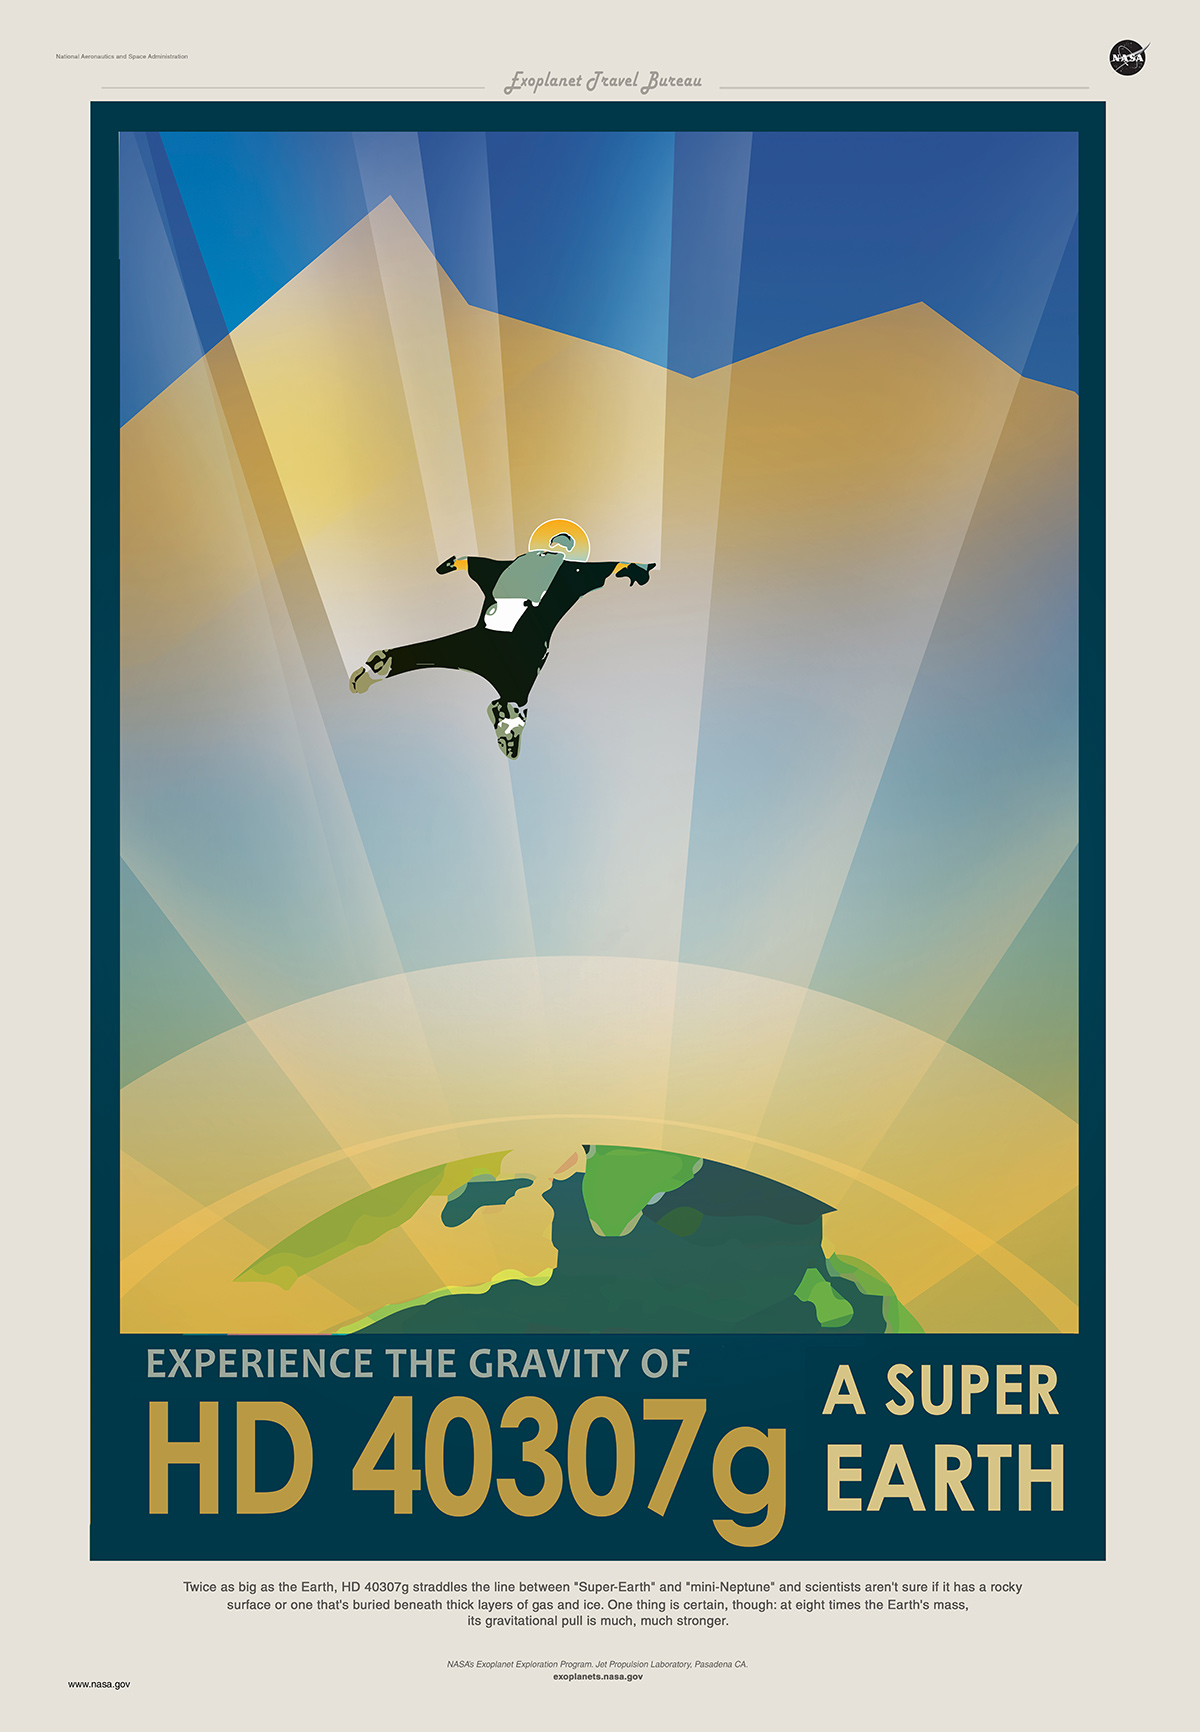 HD 40307 g, a super earth exoplanet is on a poster featuring a skin diver without a parachute.